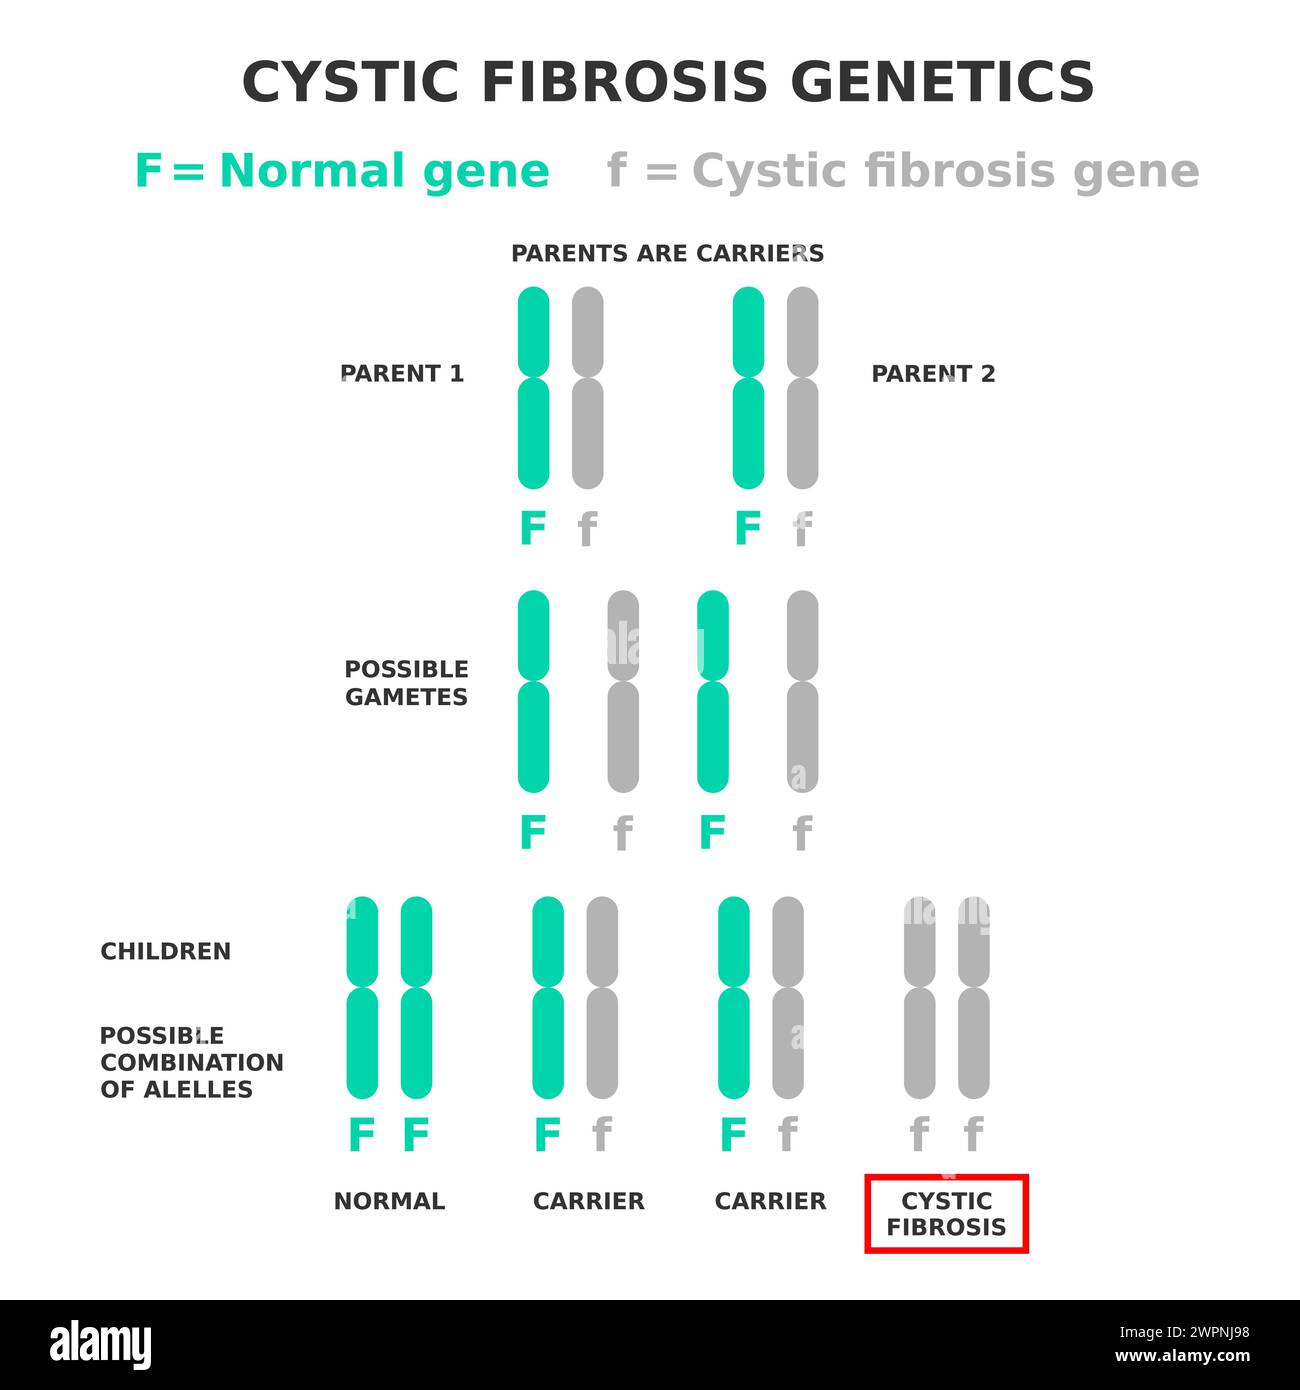 Cystic fibrosis genetics. Cystic fibrosis is an example of a recessive disease. Parents are carriers of affected allele. Vector illustration. Health. Stock Vector